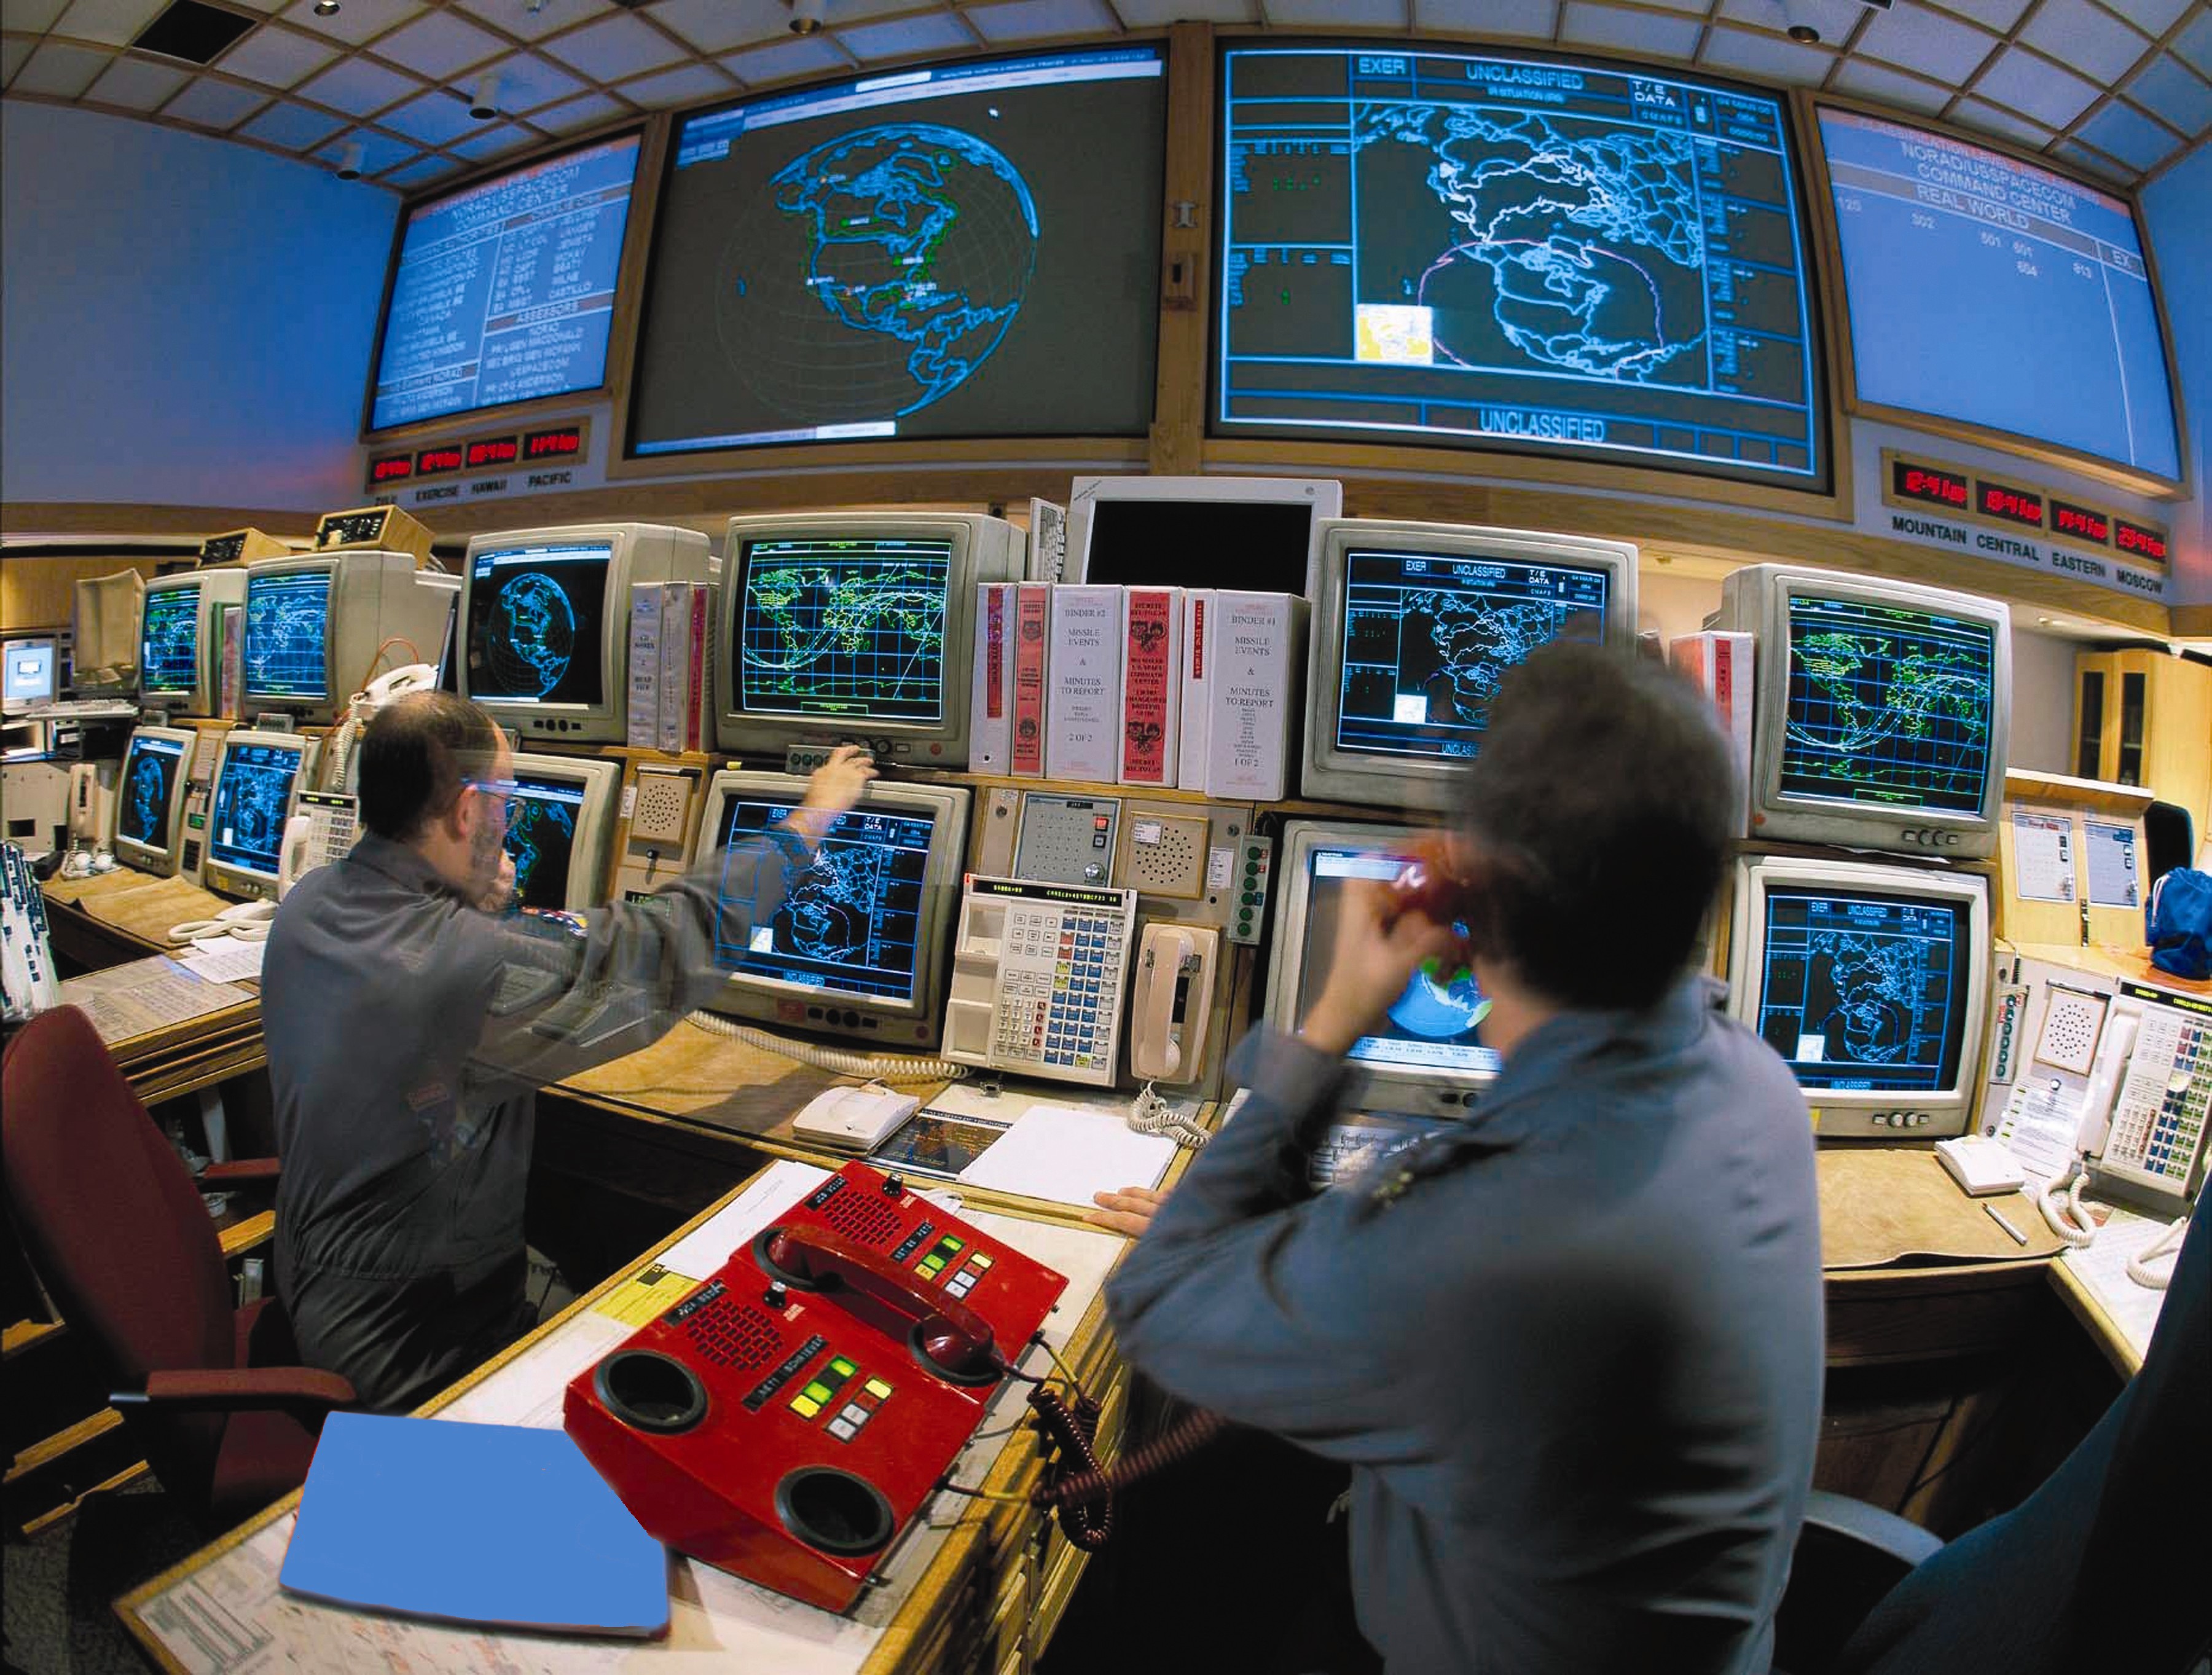 An image of the C2BMC control room.